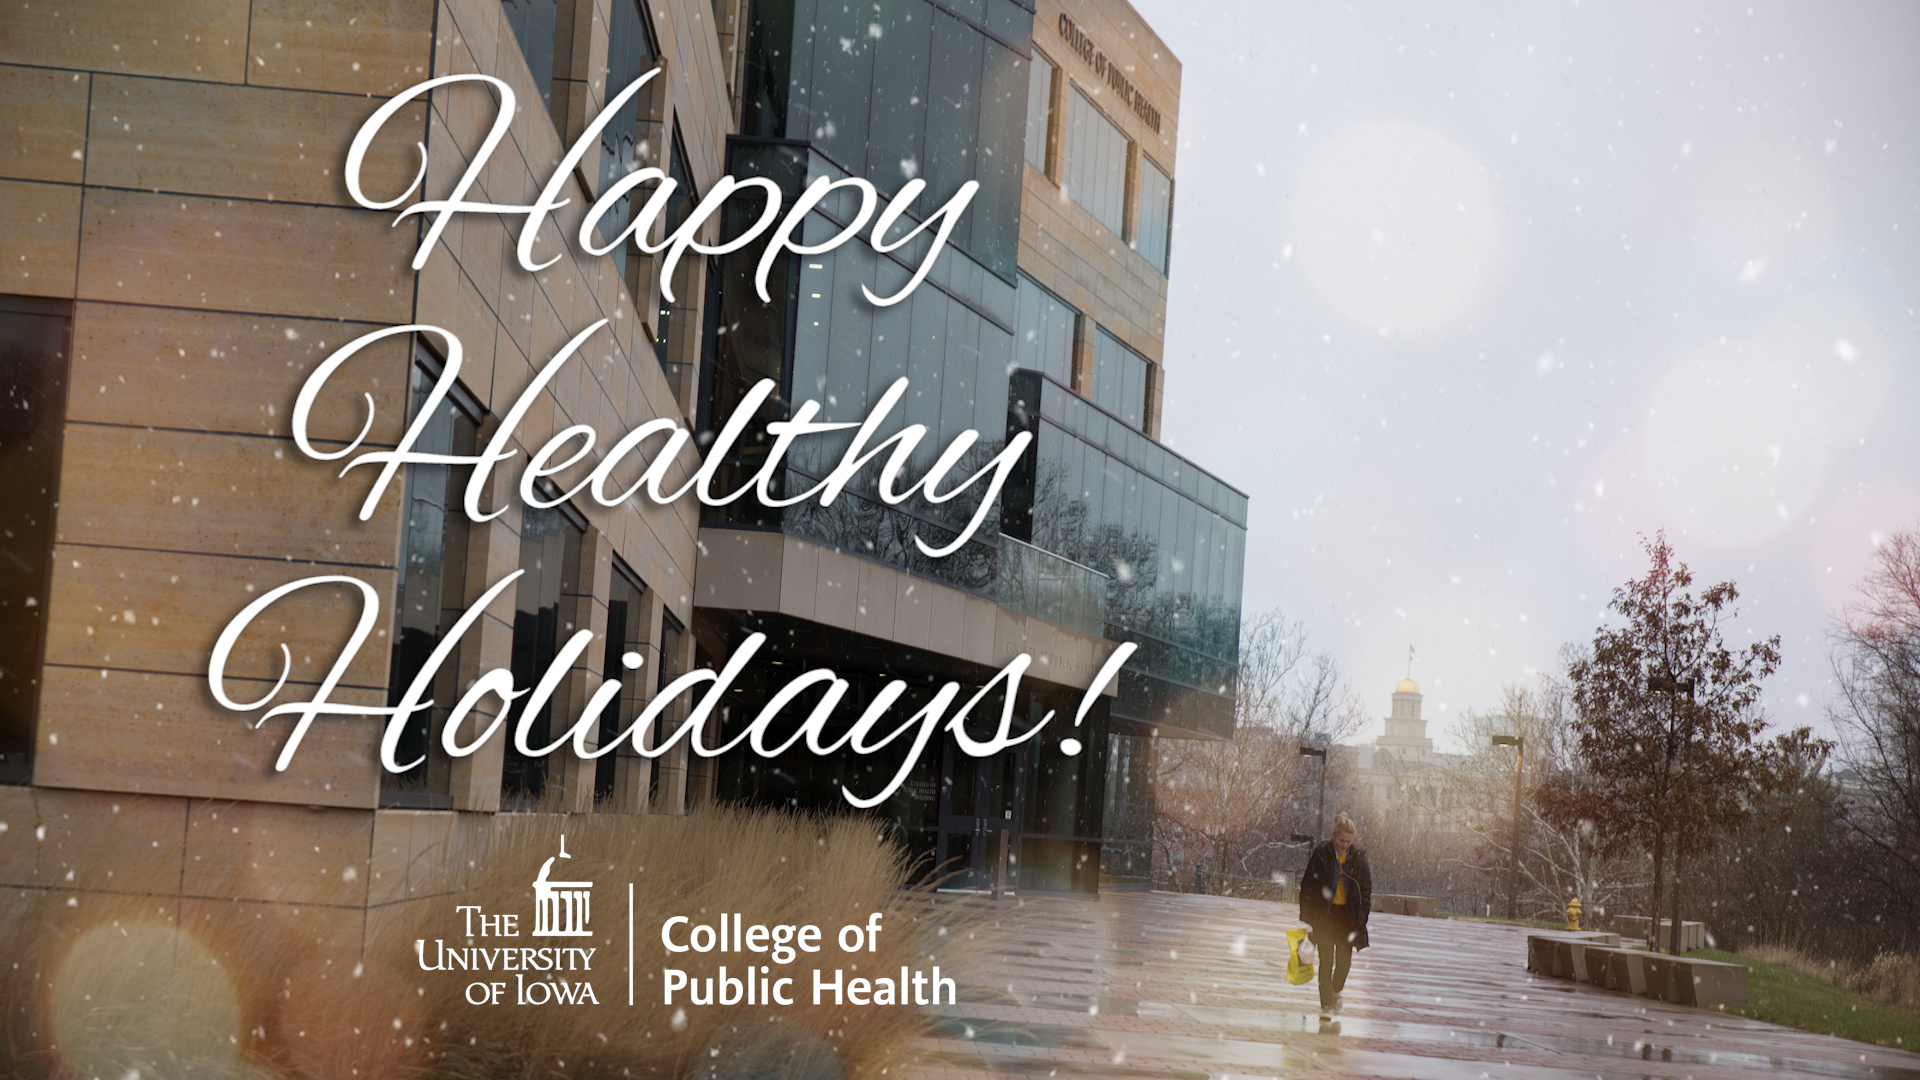 Happy Healthy Holidays from the College of Public Health